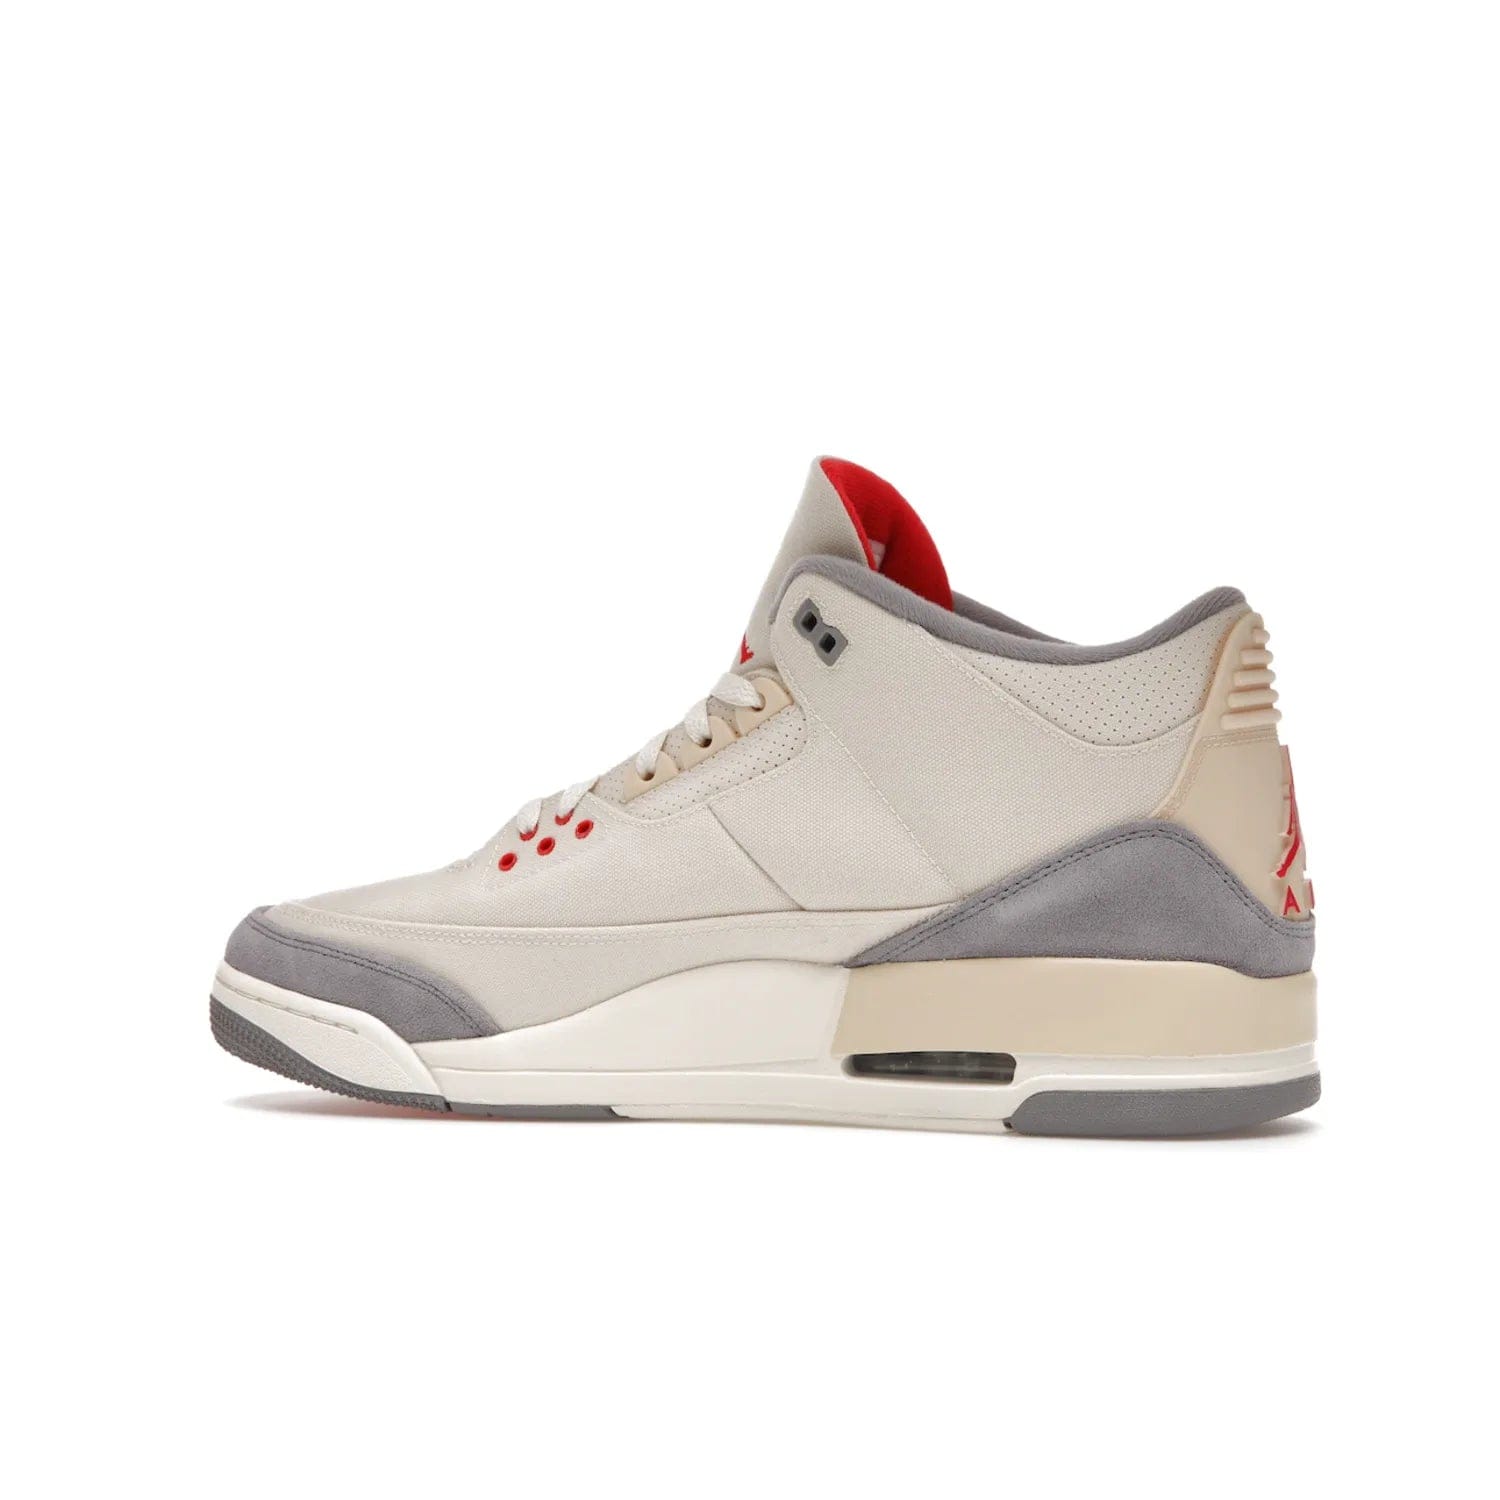 Jordan 3 Retro Muslin - Image 21 - Only at www.BallersClubKickz.com - Eye-catching Air Jordan 3 Retro Muslin in a neutral palette of grey, cream, and red. Featuring canvas upper, suede overlays and white/grey Air Max sole. Available in March 2022.